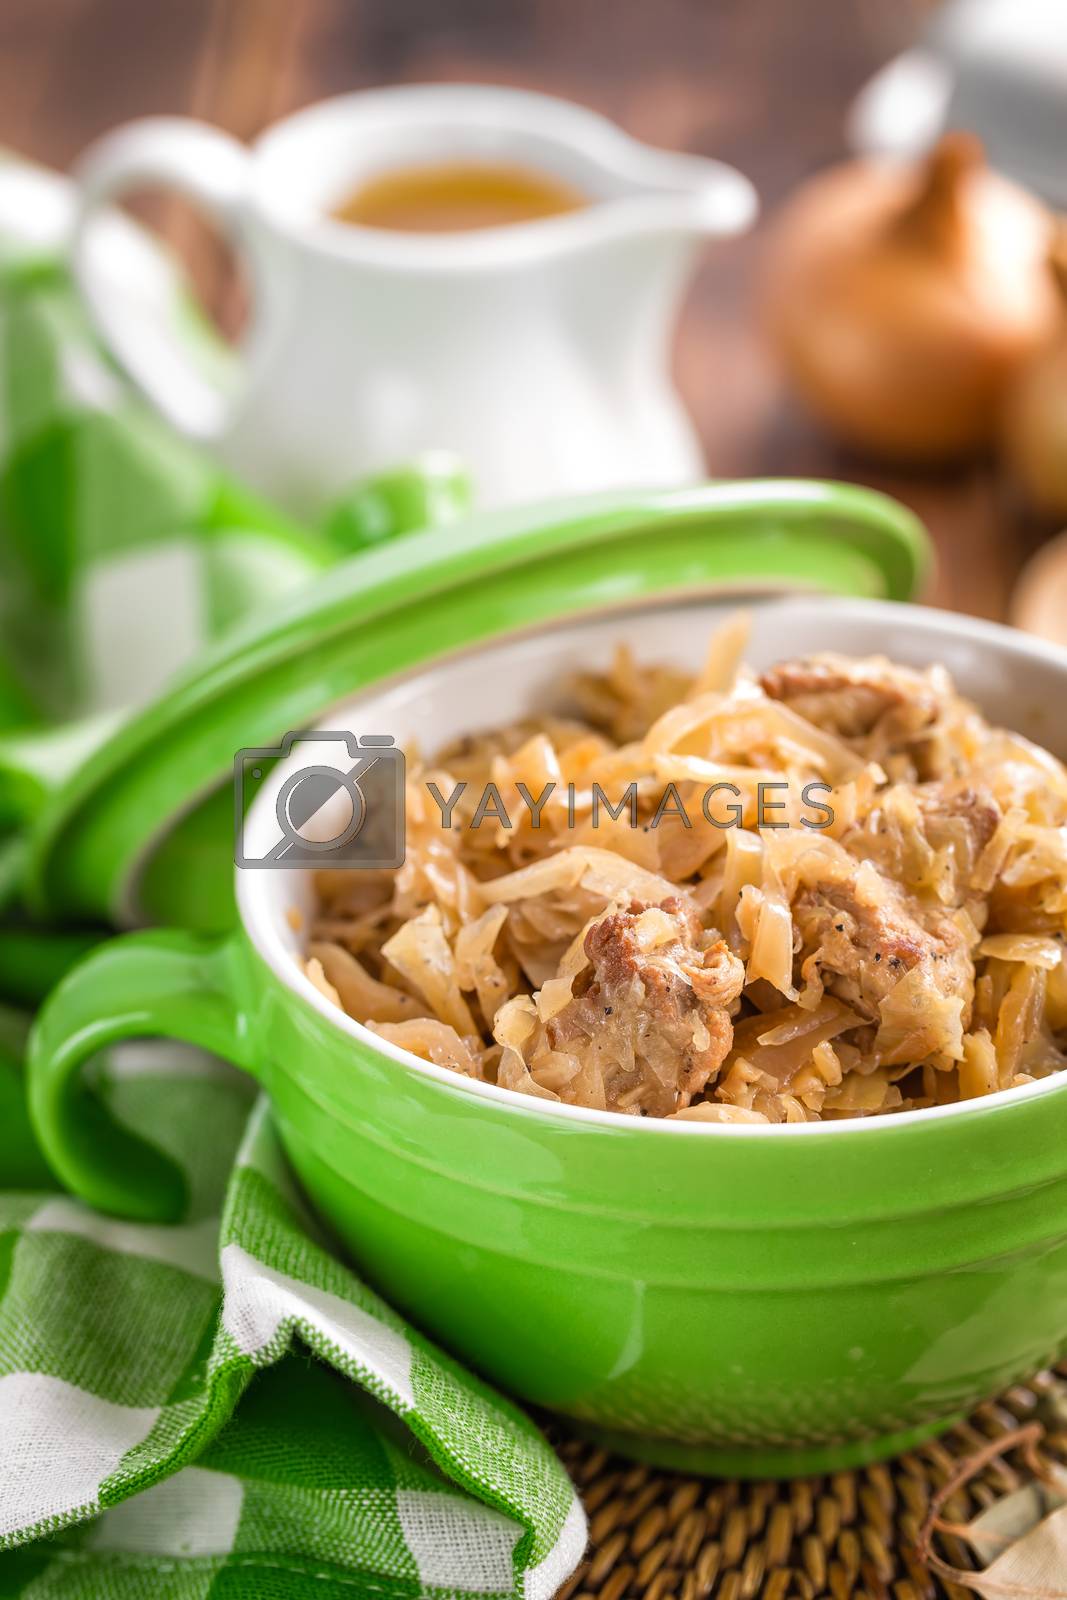 Royalty free image of Braised cabbage with meat by yelenayemchuk